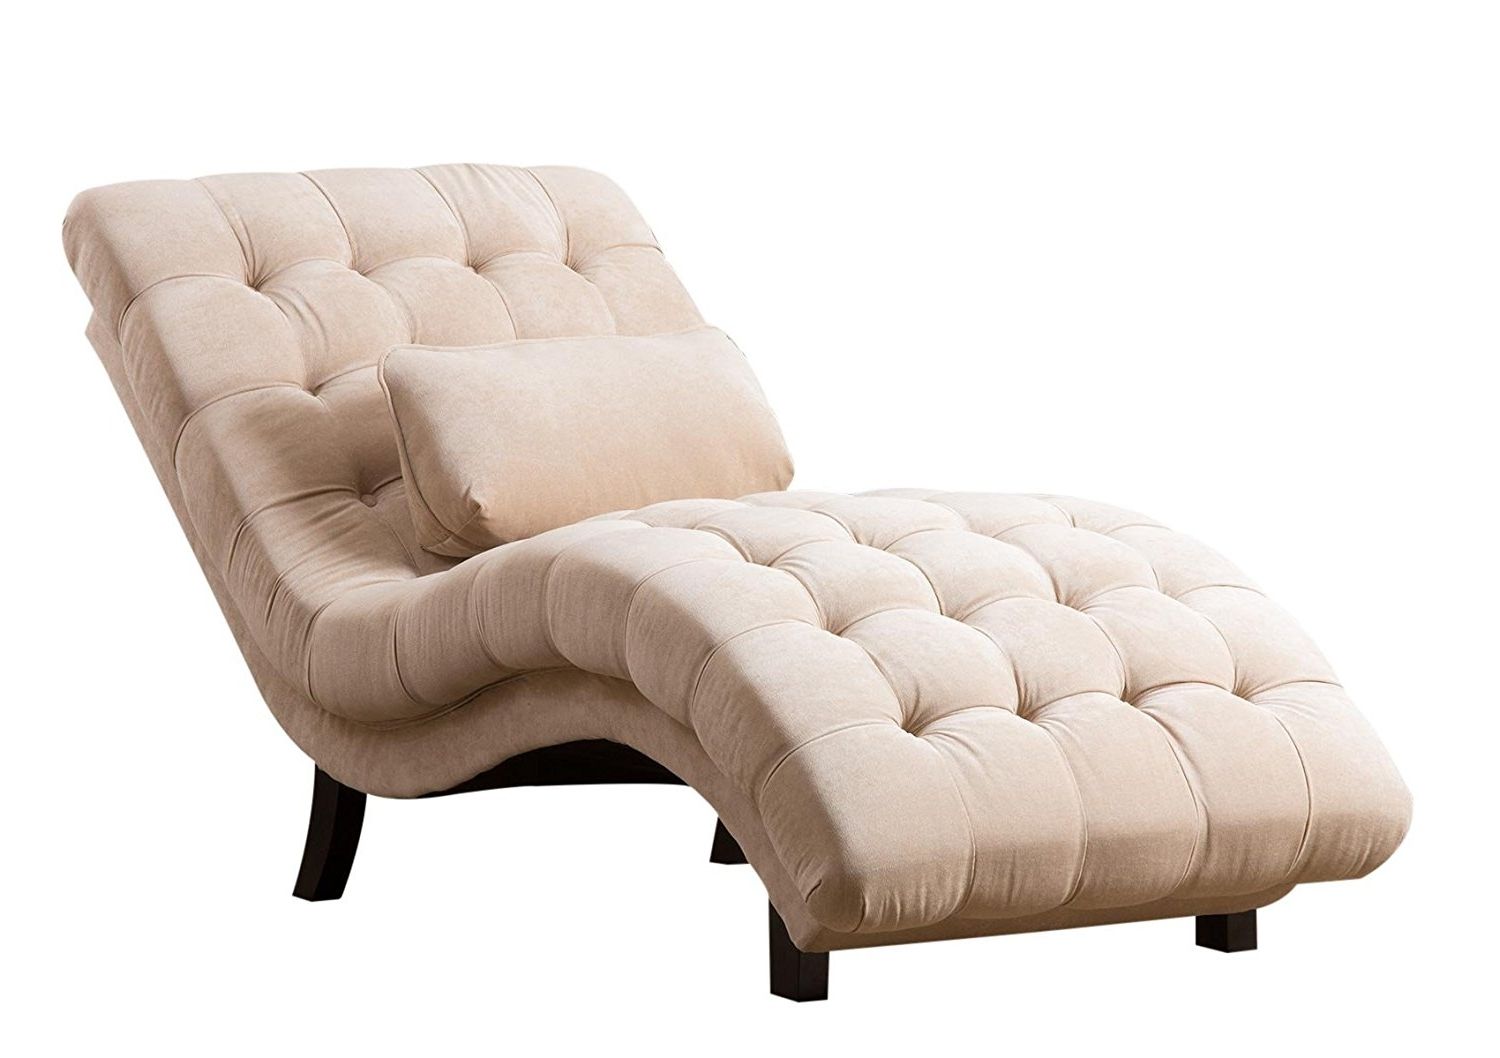 Amazon: Abbyson Carmen Cream Fabric Chaise: Home & Kitchen With Well Known Fabric Chaise Lounges (View 4 of 15)